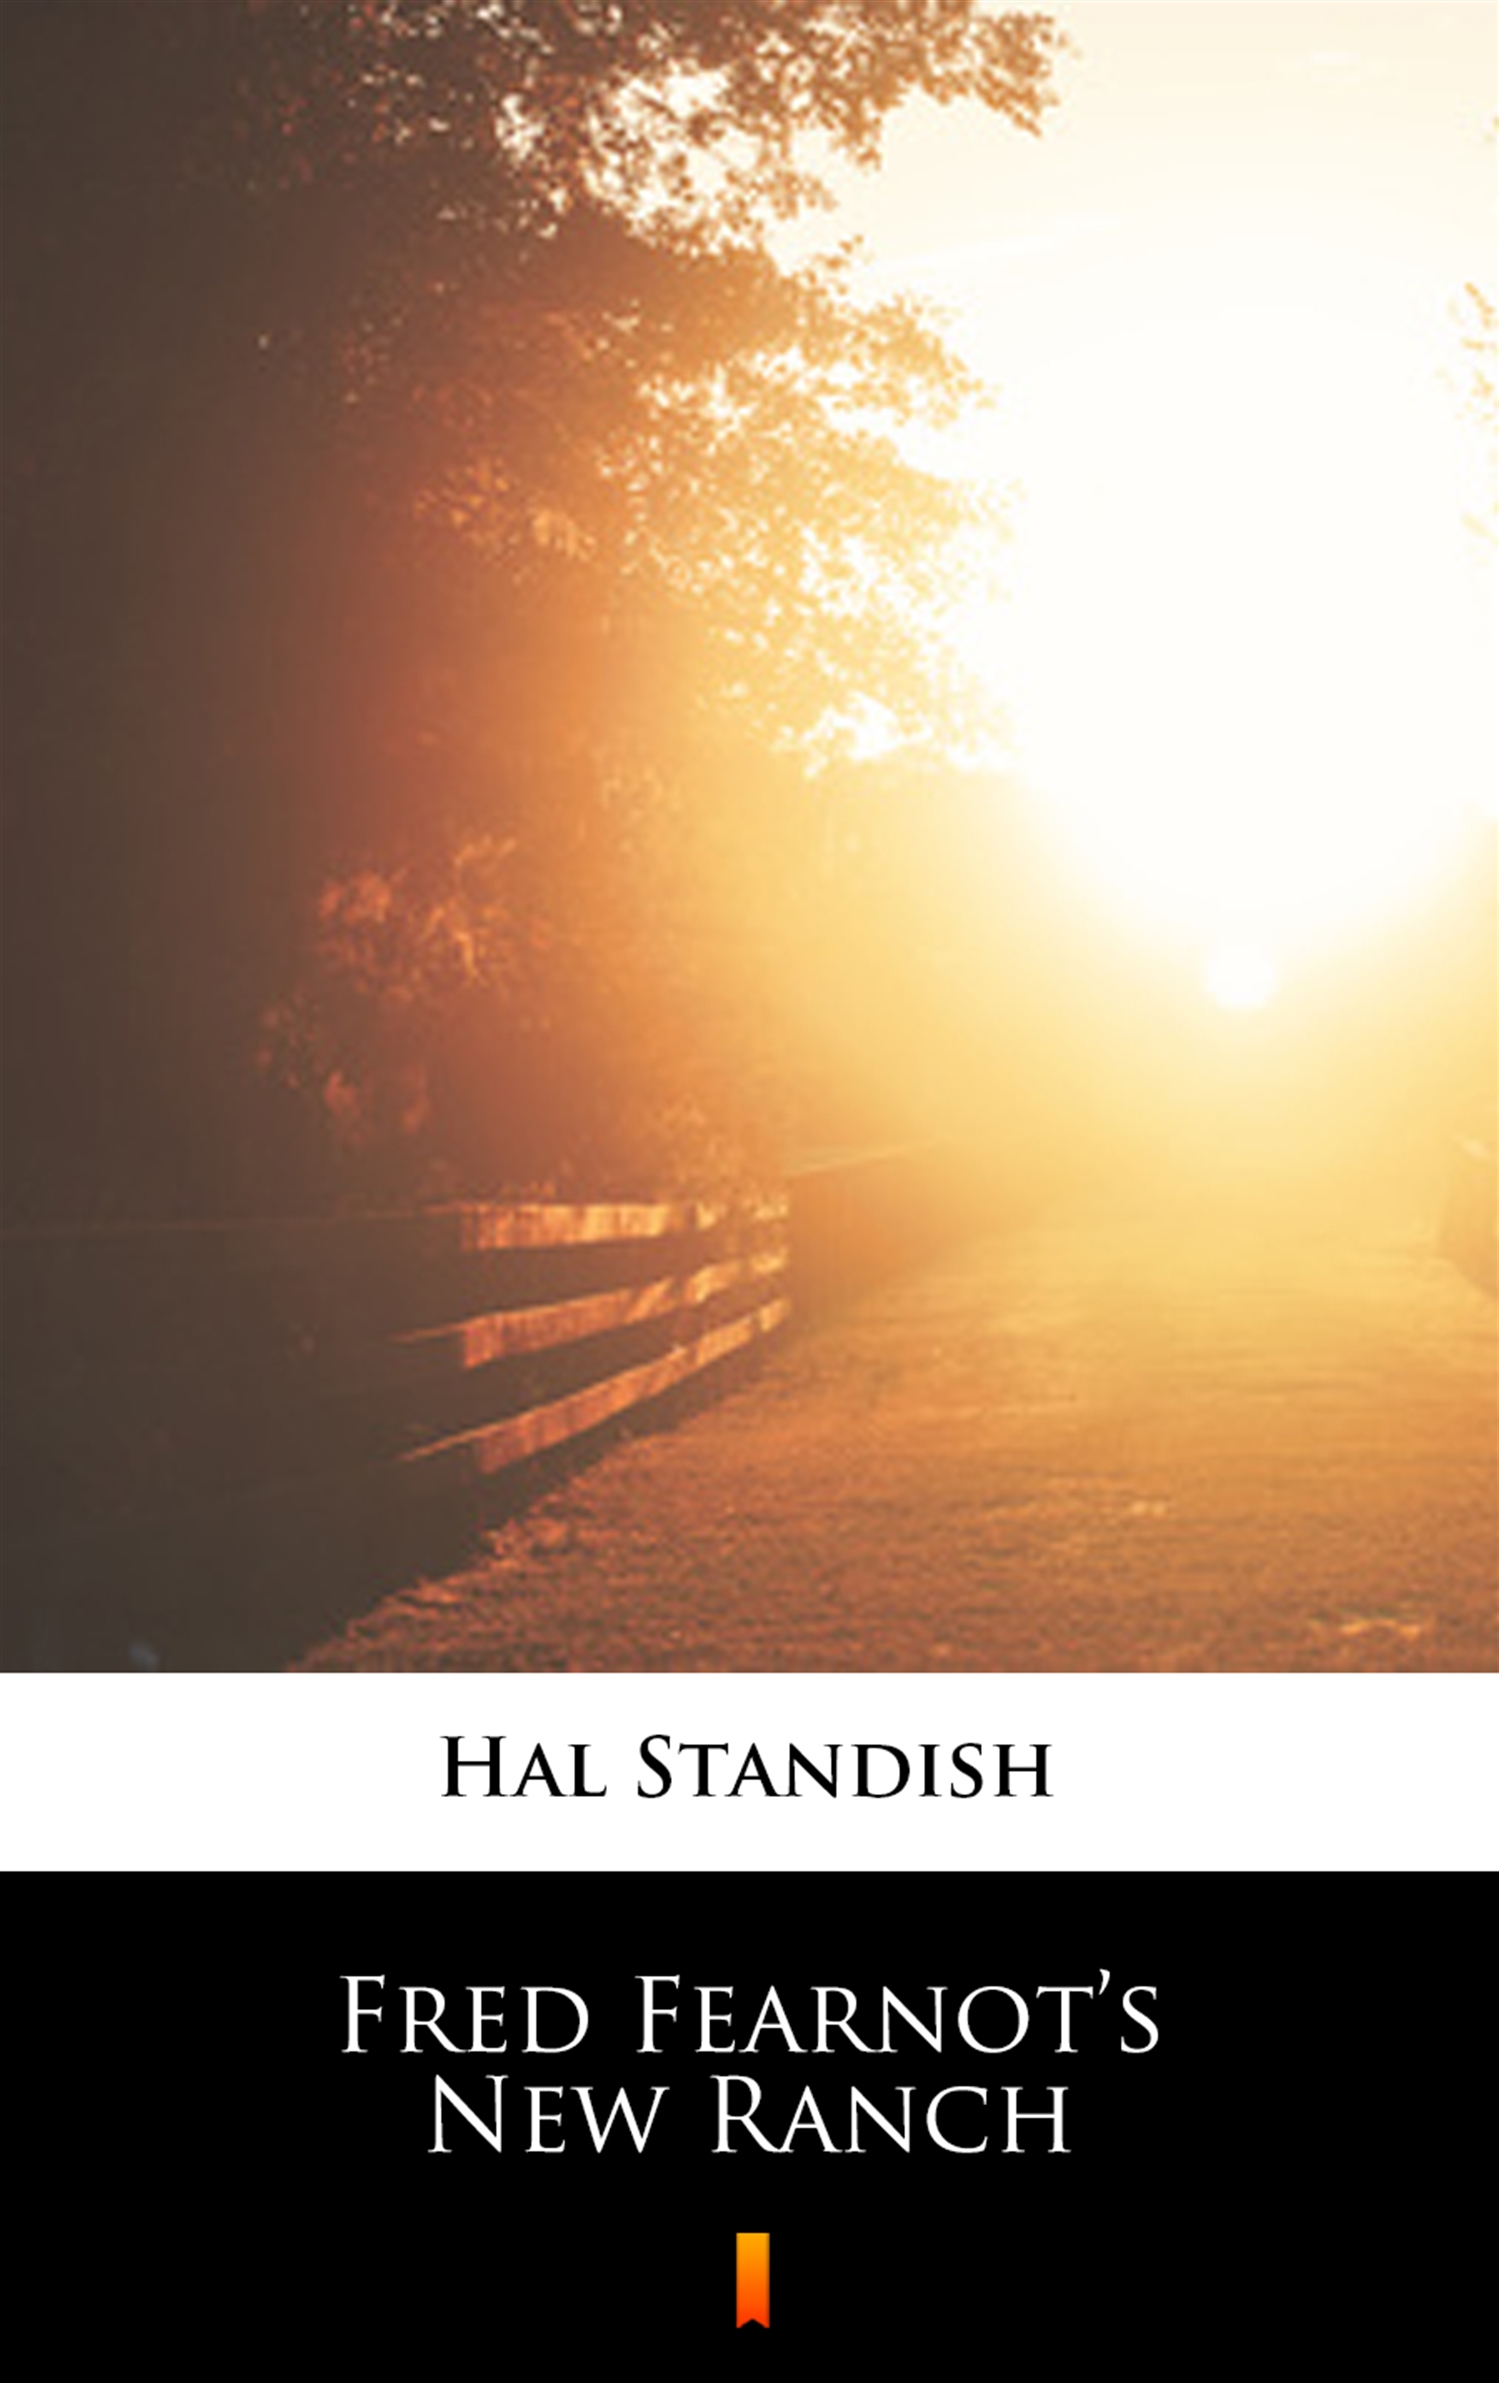 Скачать Fred Fearnot’s New Ranch - Hal Standish